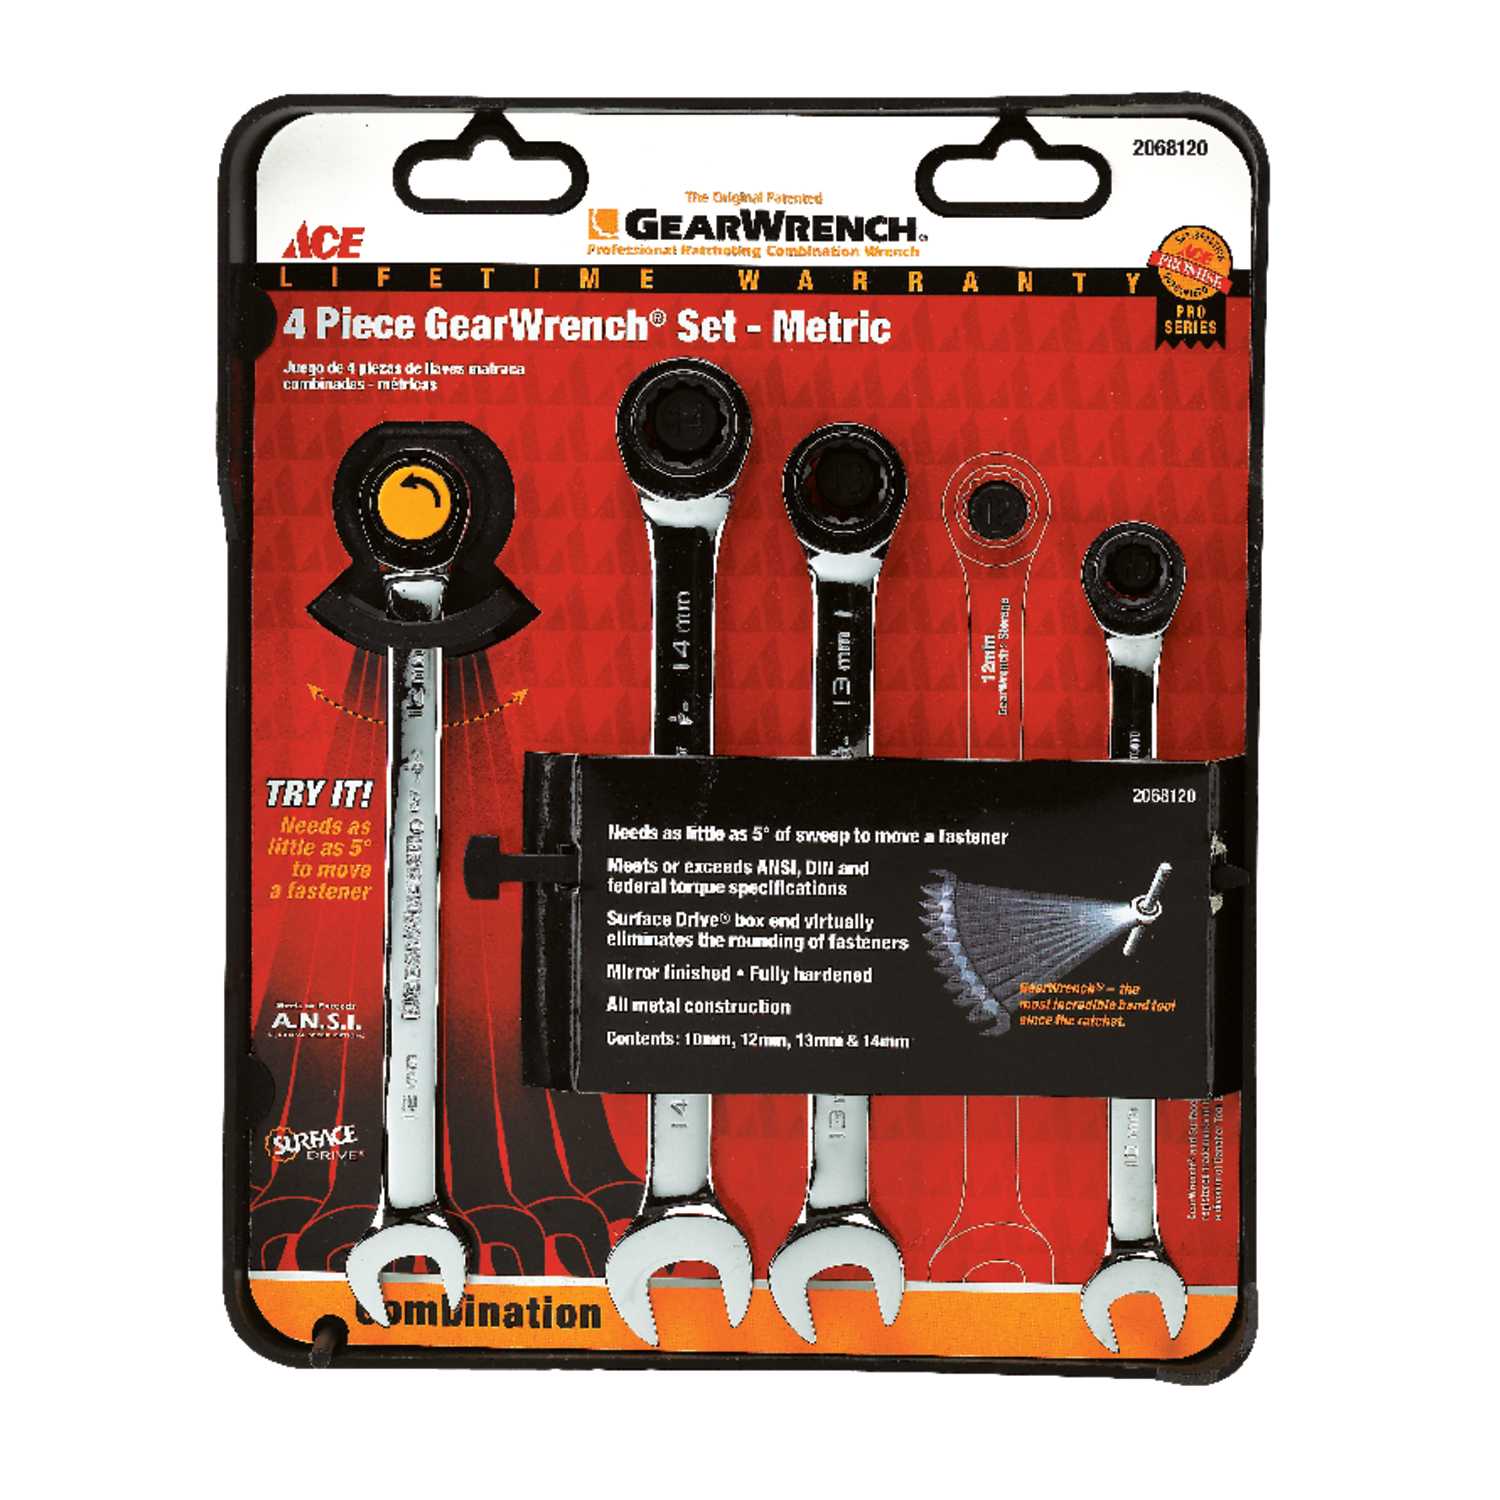  Ace  Multiple Metric Ratcheting Gearwrench Set 4 pc  Ace  